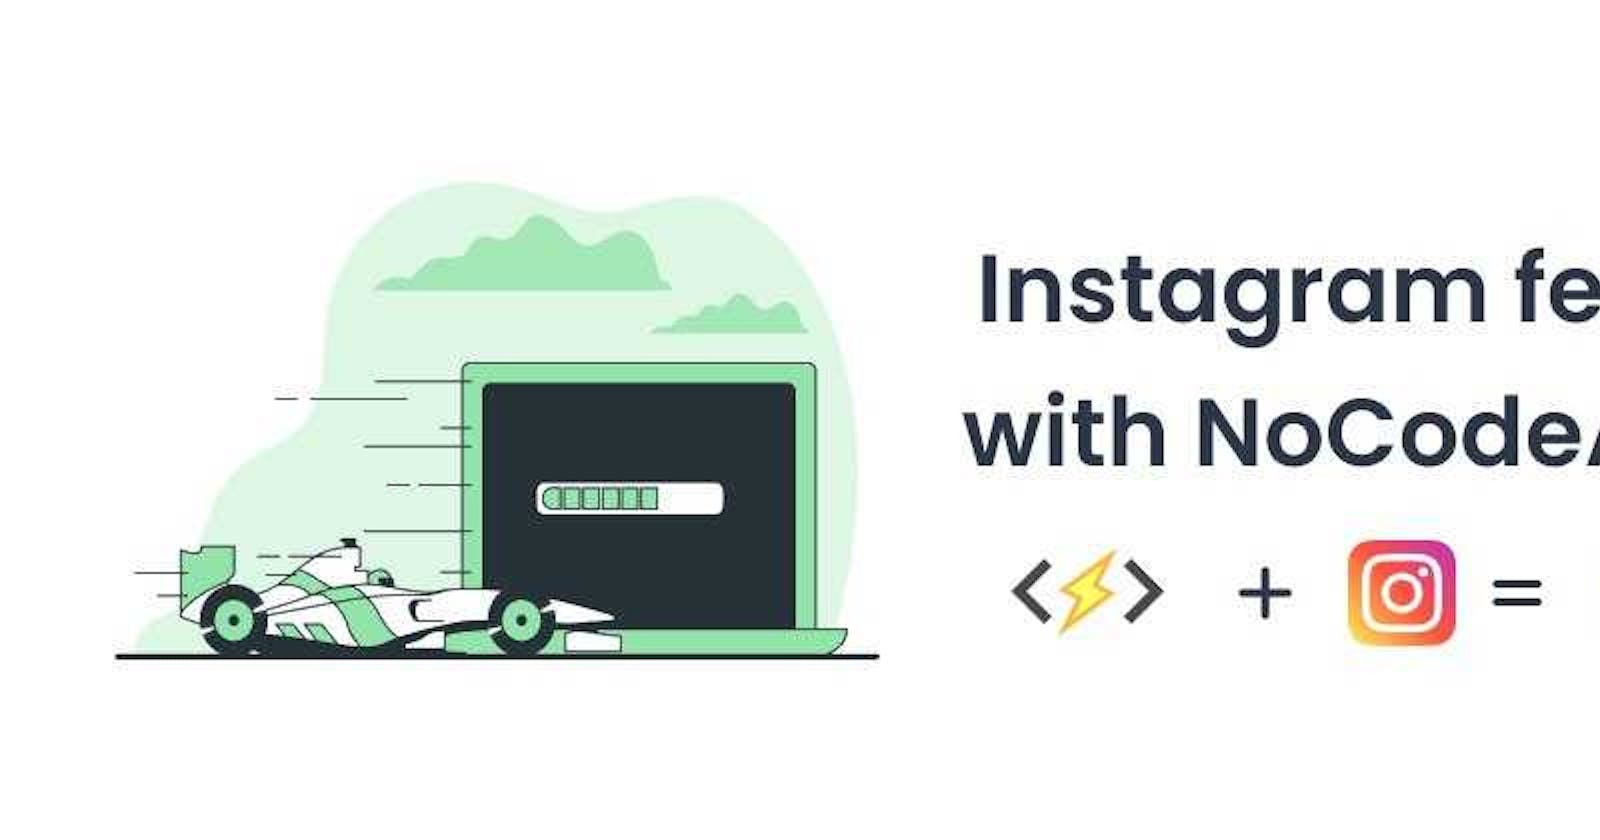 How to access Instagram feed with API